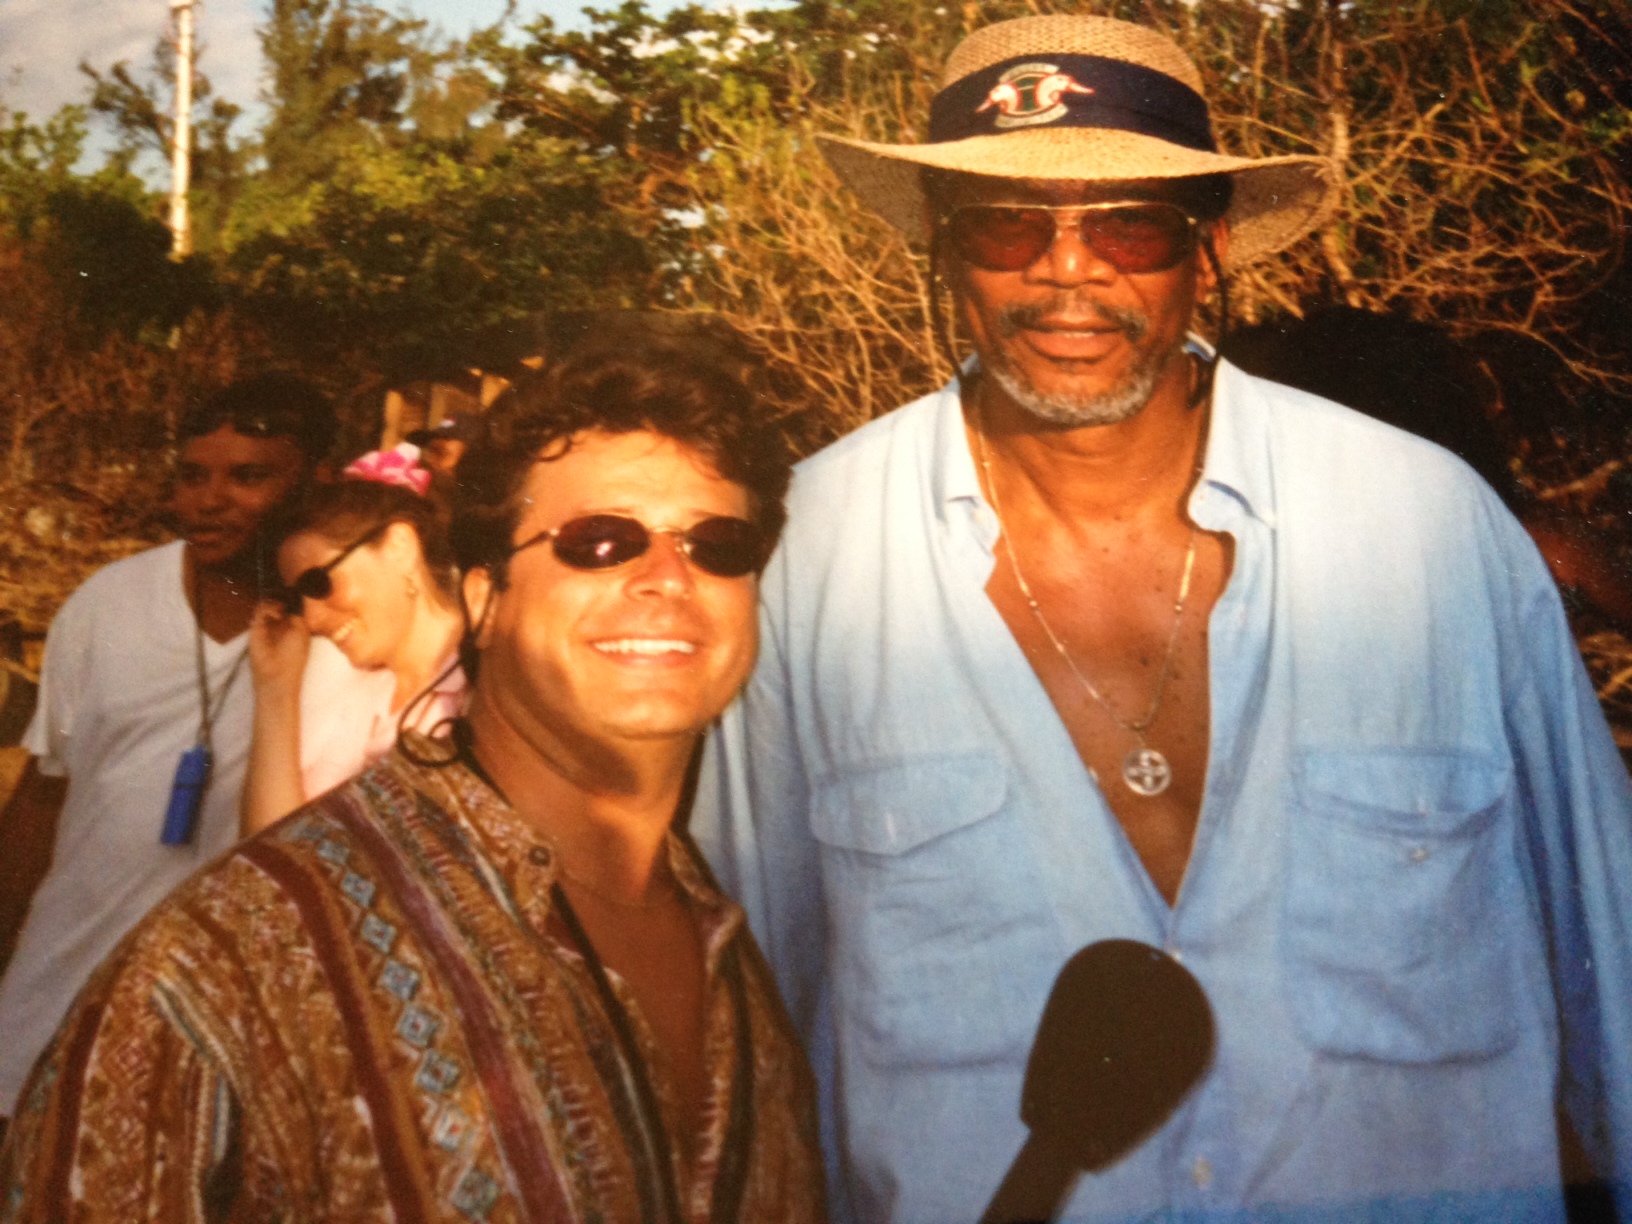 Directing & Producing a Film/TV Special with Academy Award Winner Morgan Freeman